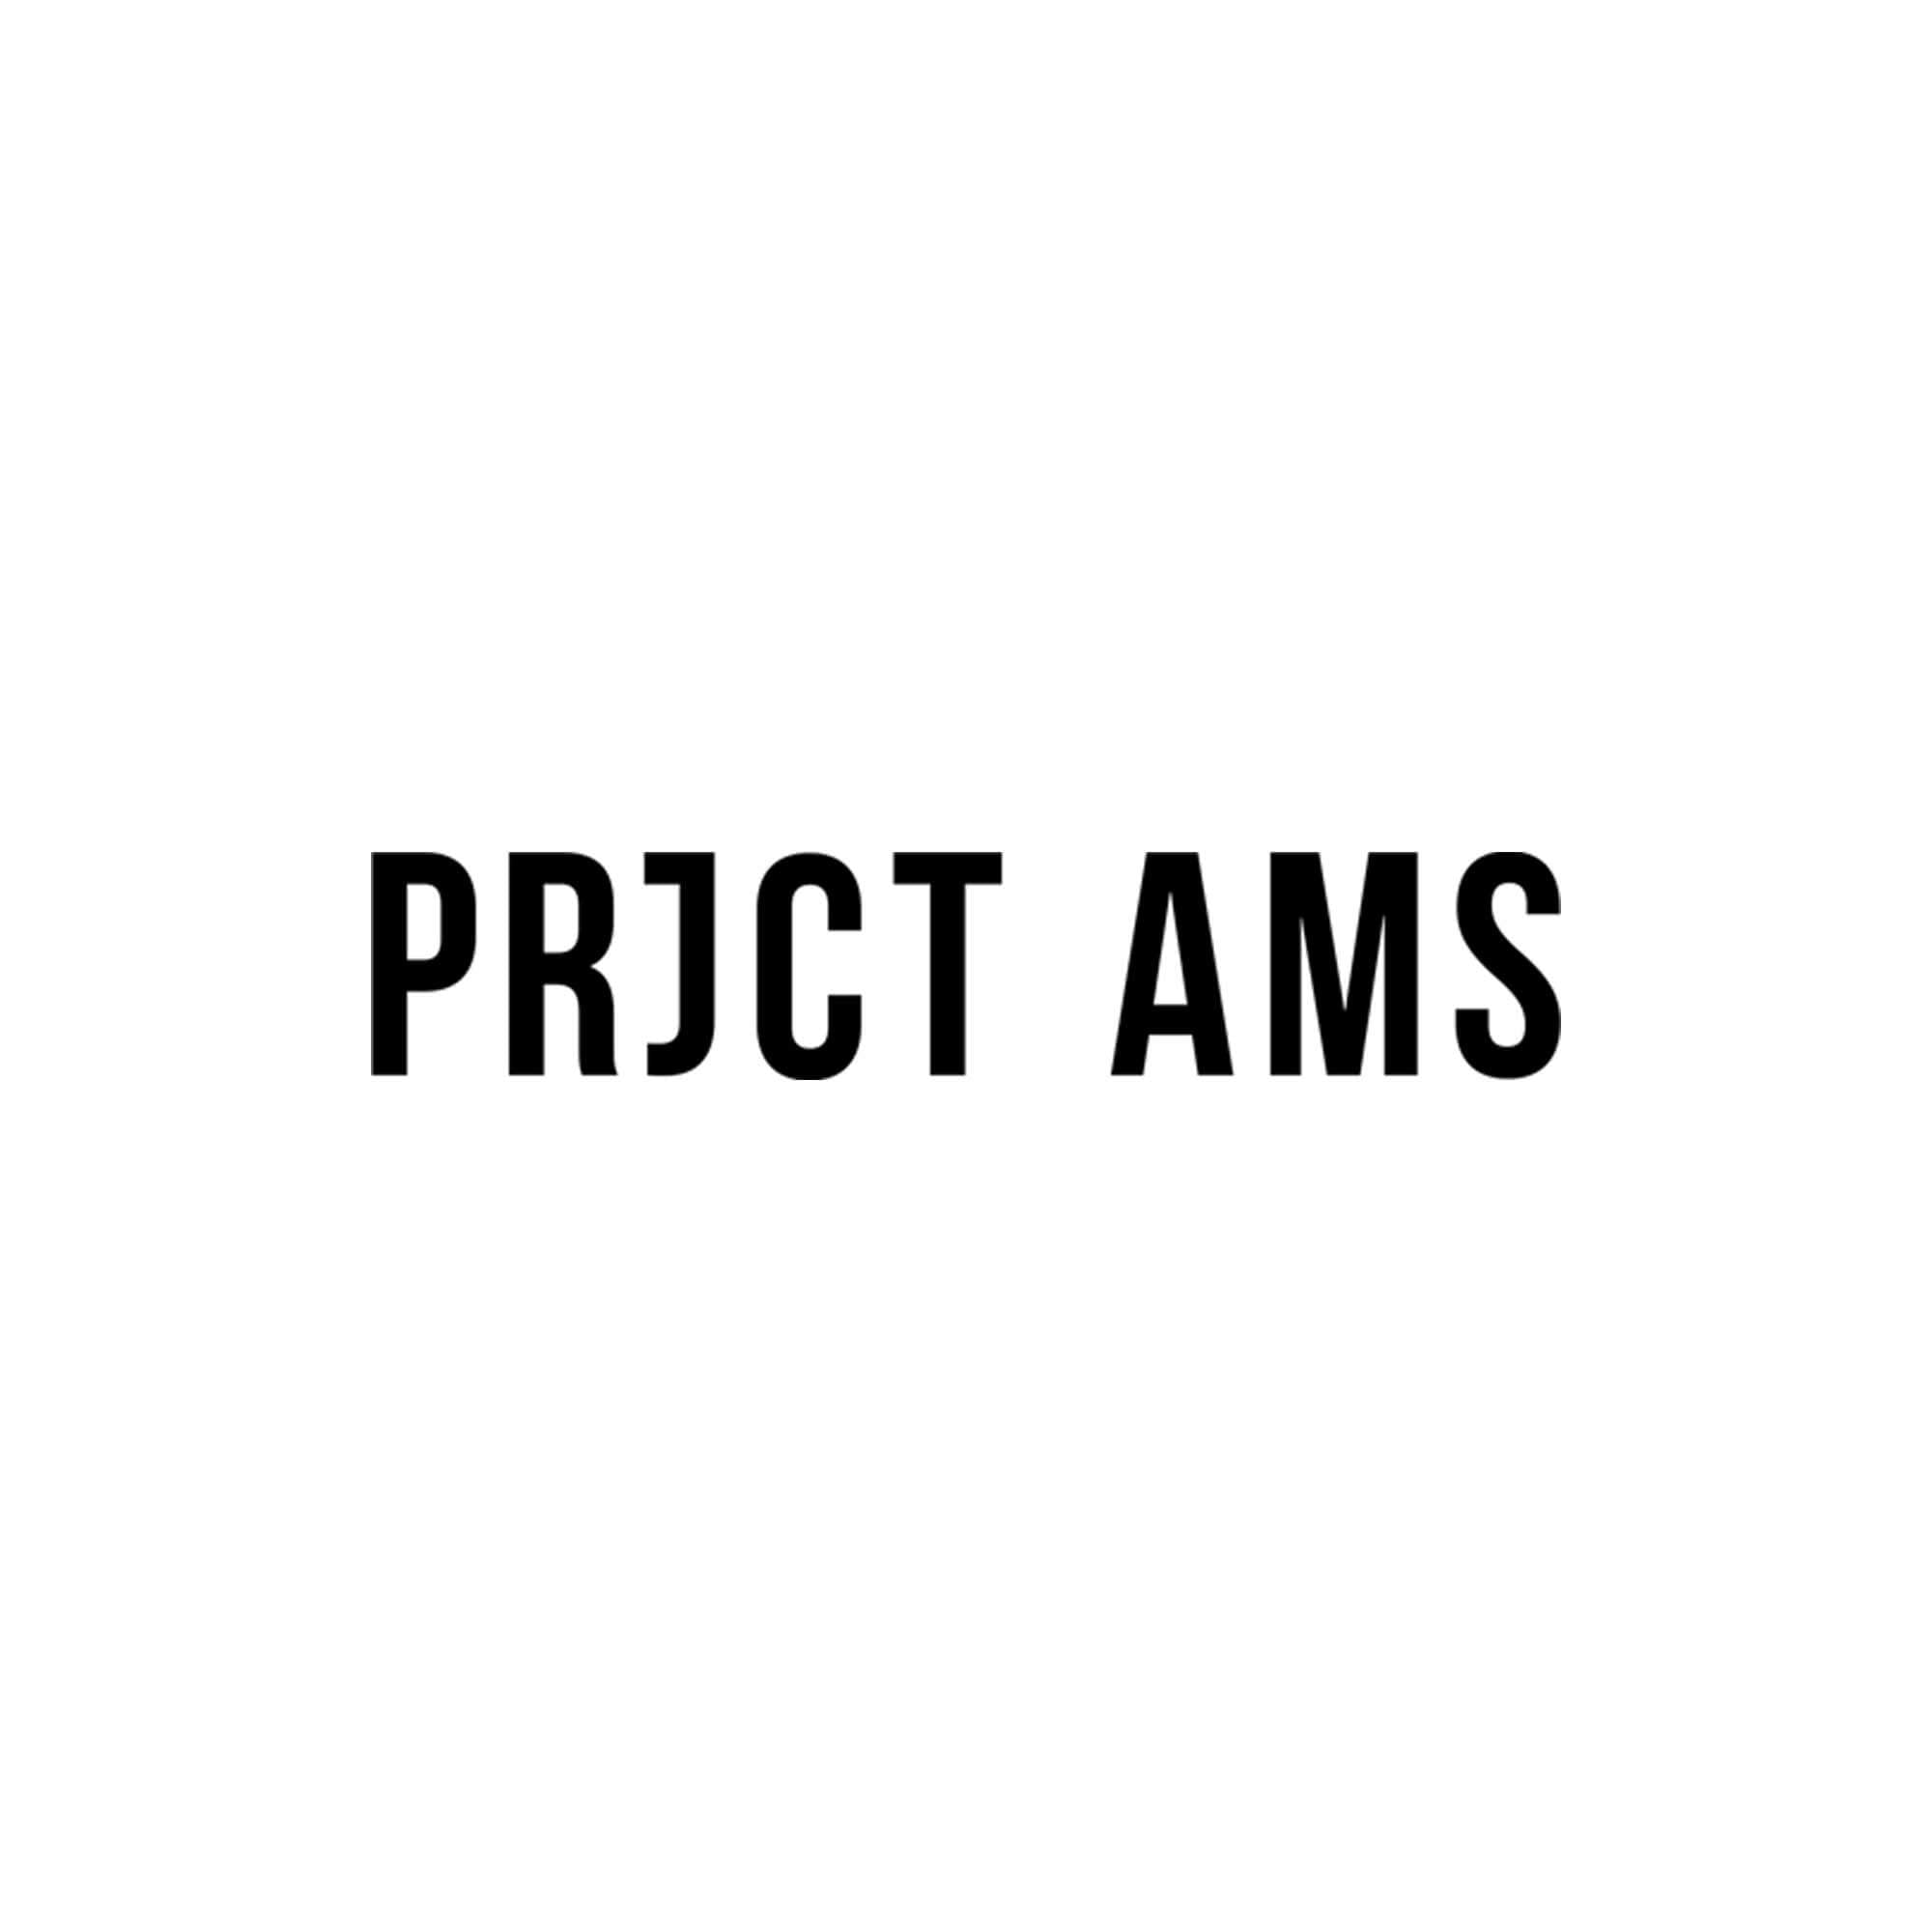 PRJCT AMS Giftcard